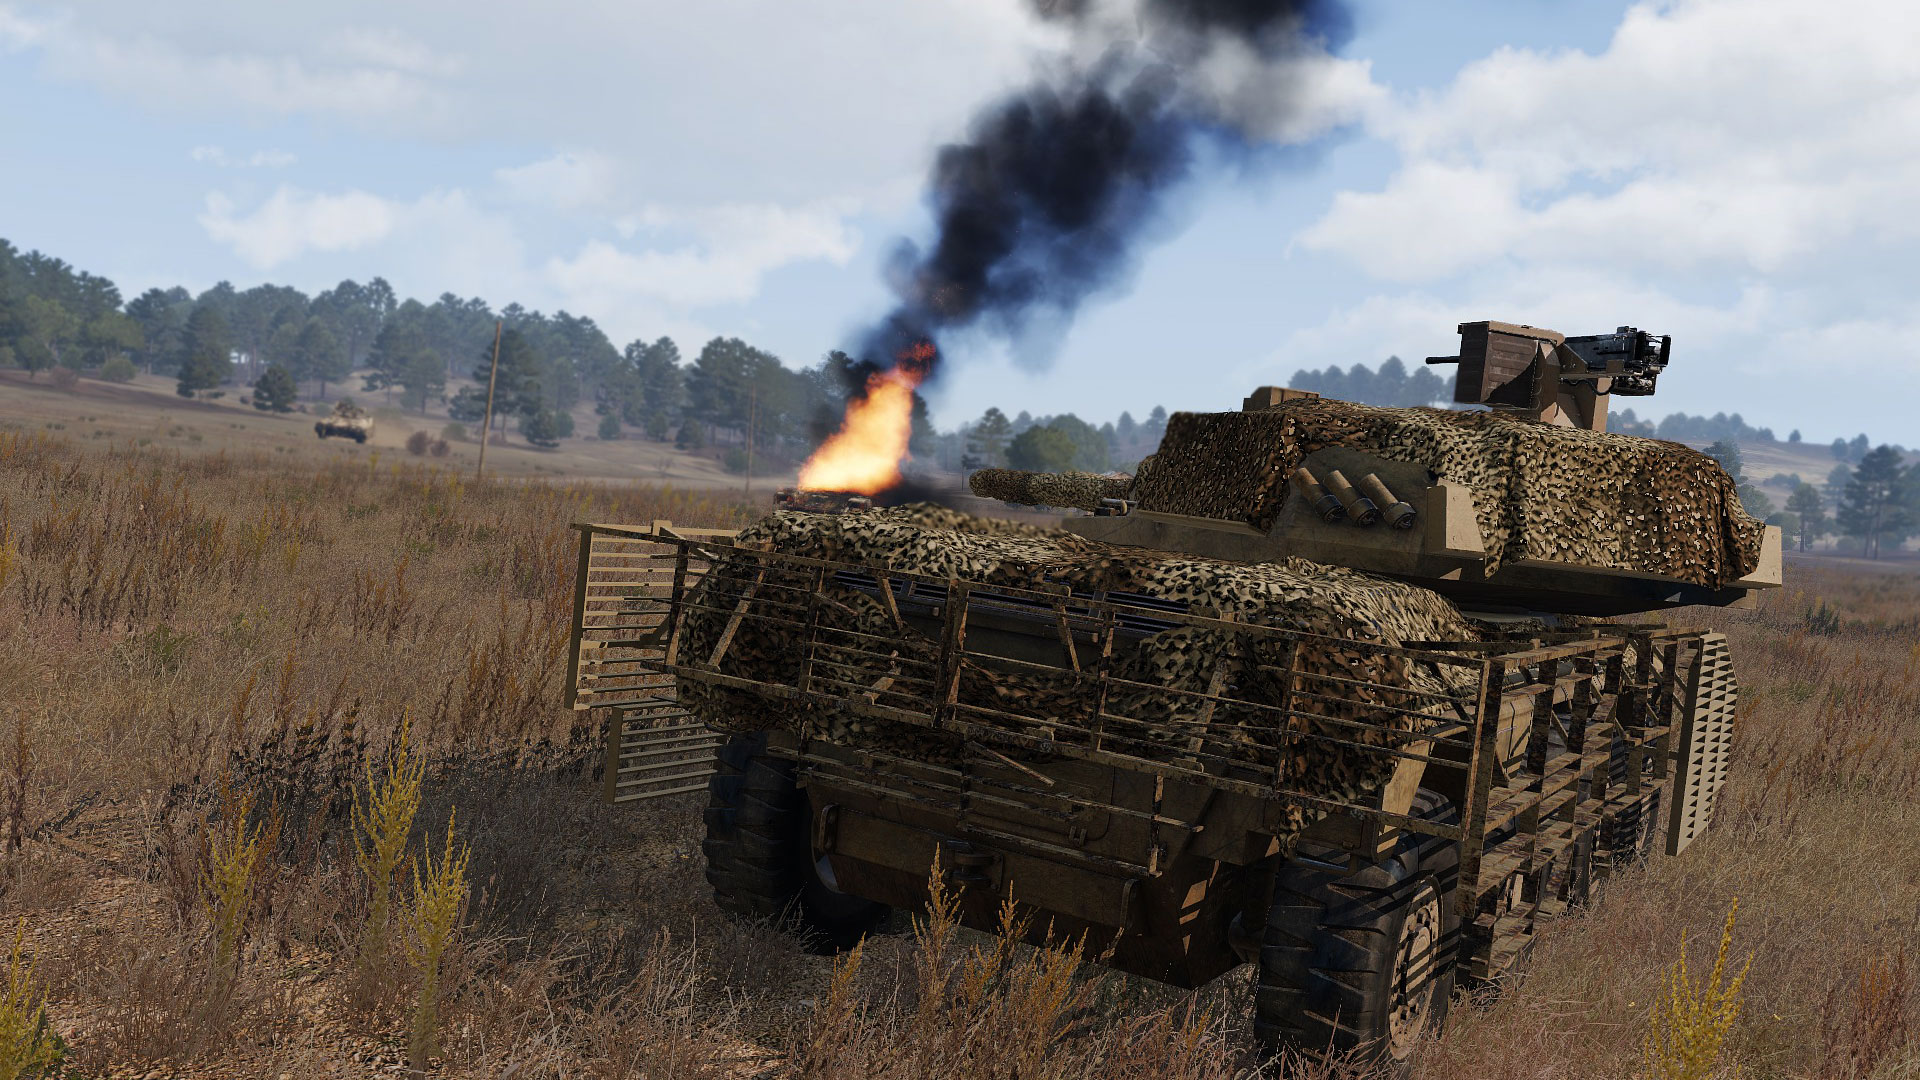 Arma 3 pcml fire modes